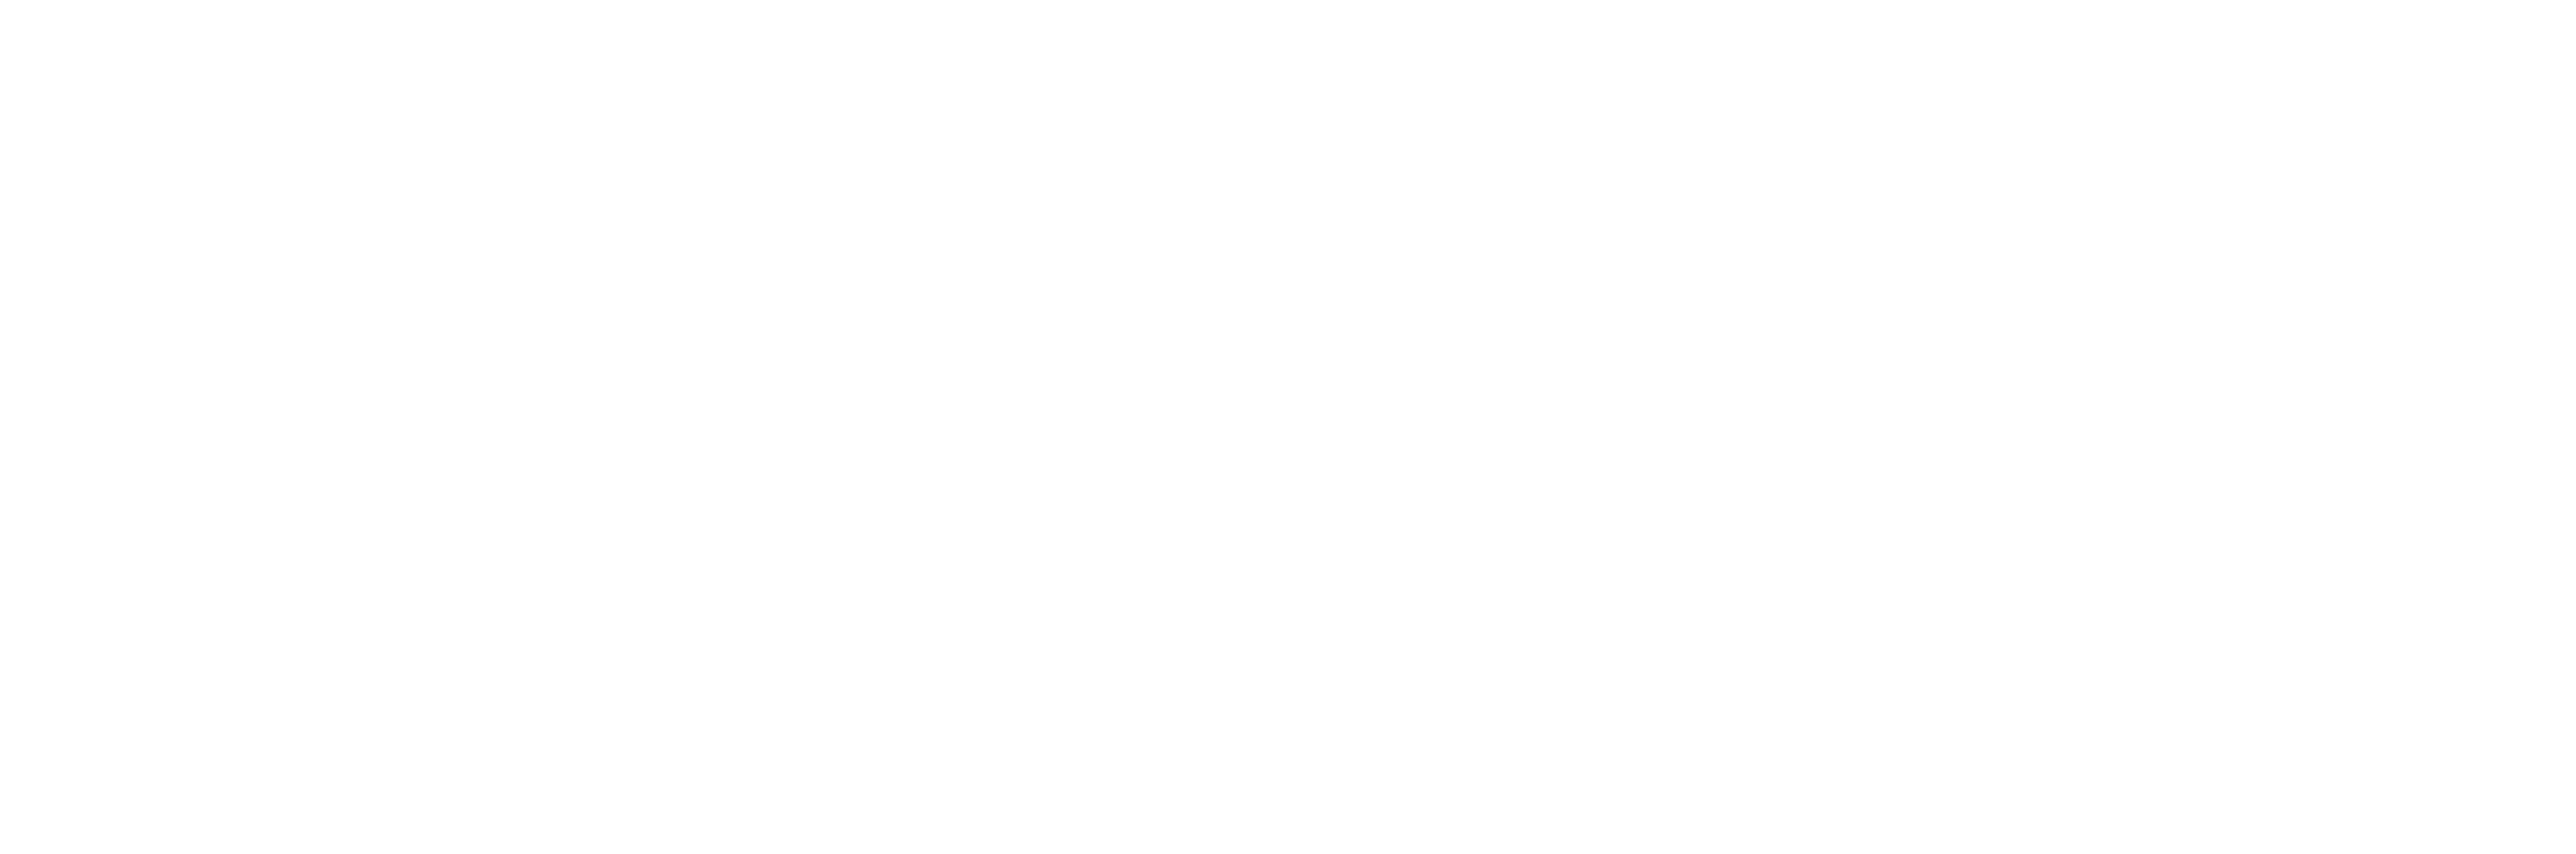 CN-BUSINESS SYSTEMS-STACKED-WHITE